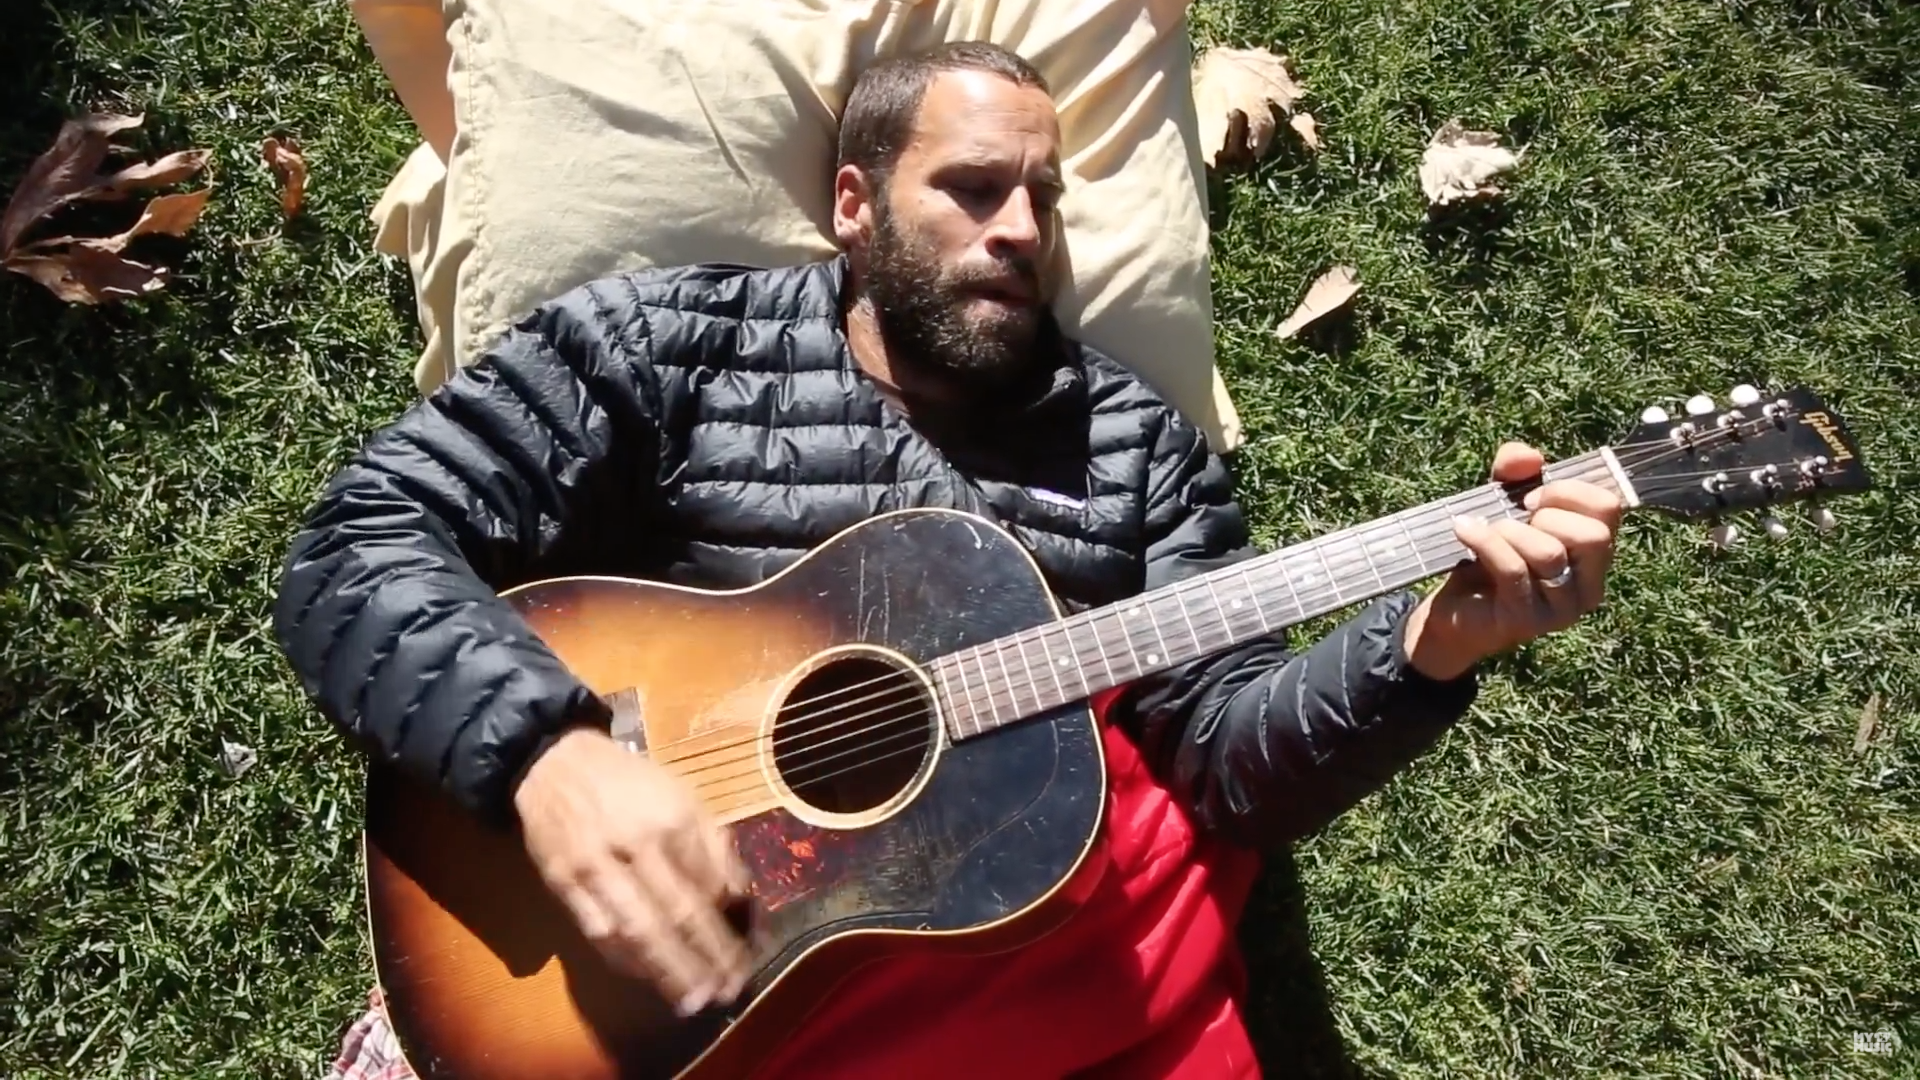 Jack Johnson performing at Bedstock 2016. Photo by: MyMusicRx / YouTube